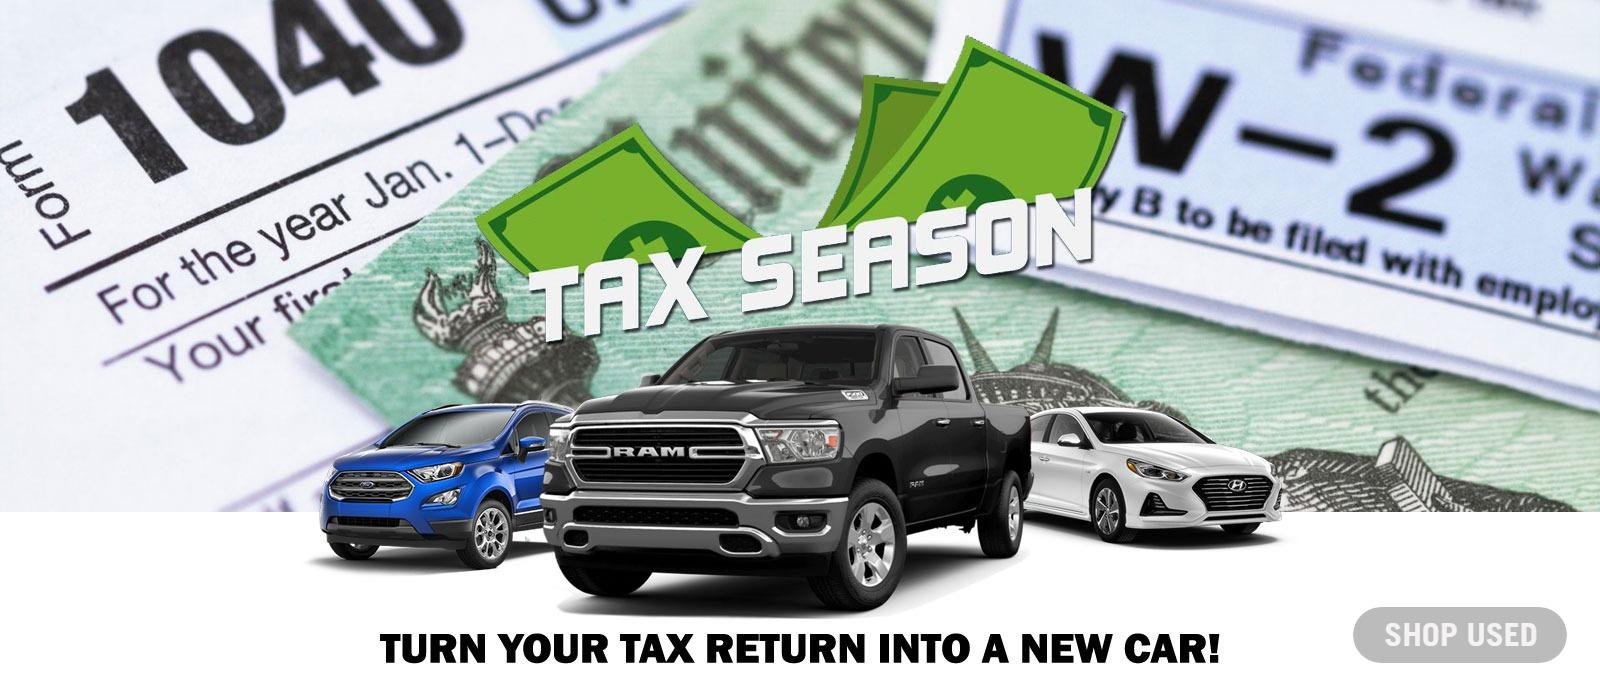 TAX SEASON - USED VEHICLES WITH TAX FORM BACKGROUND